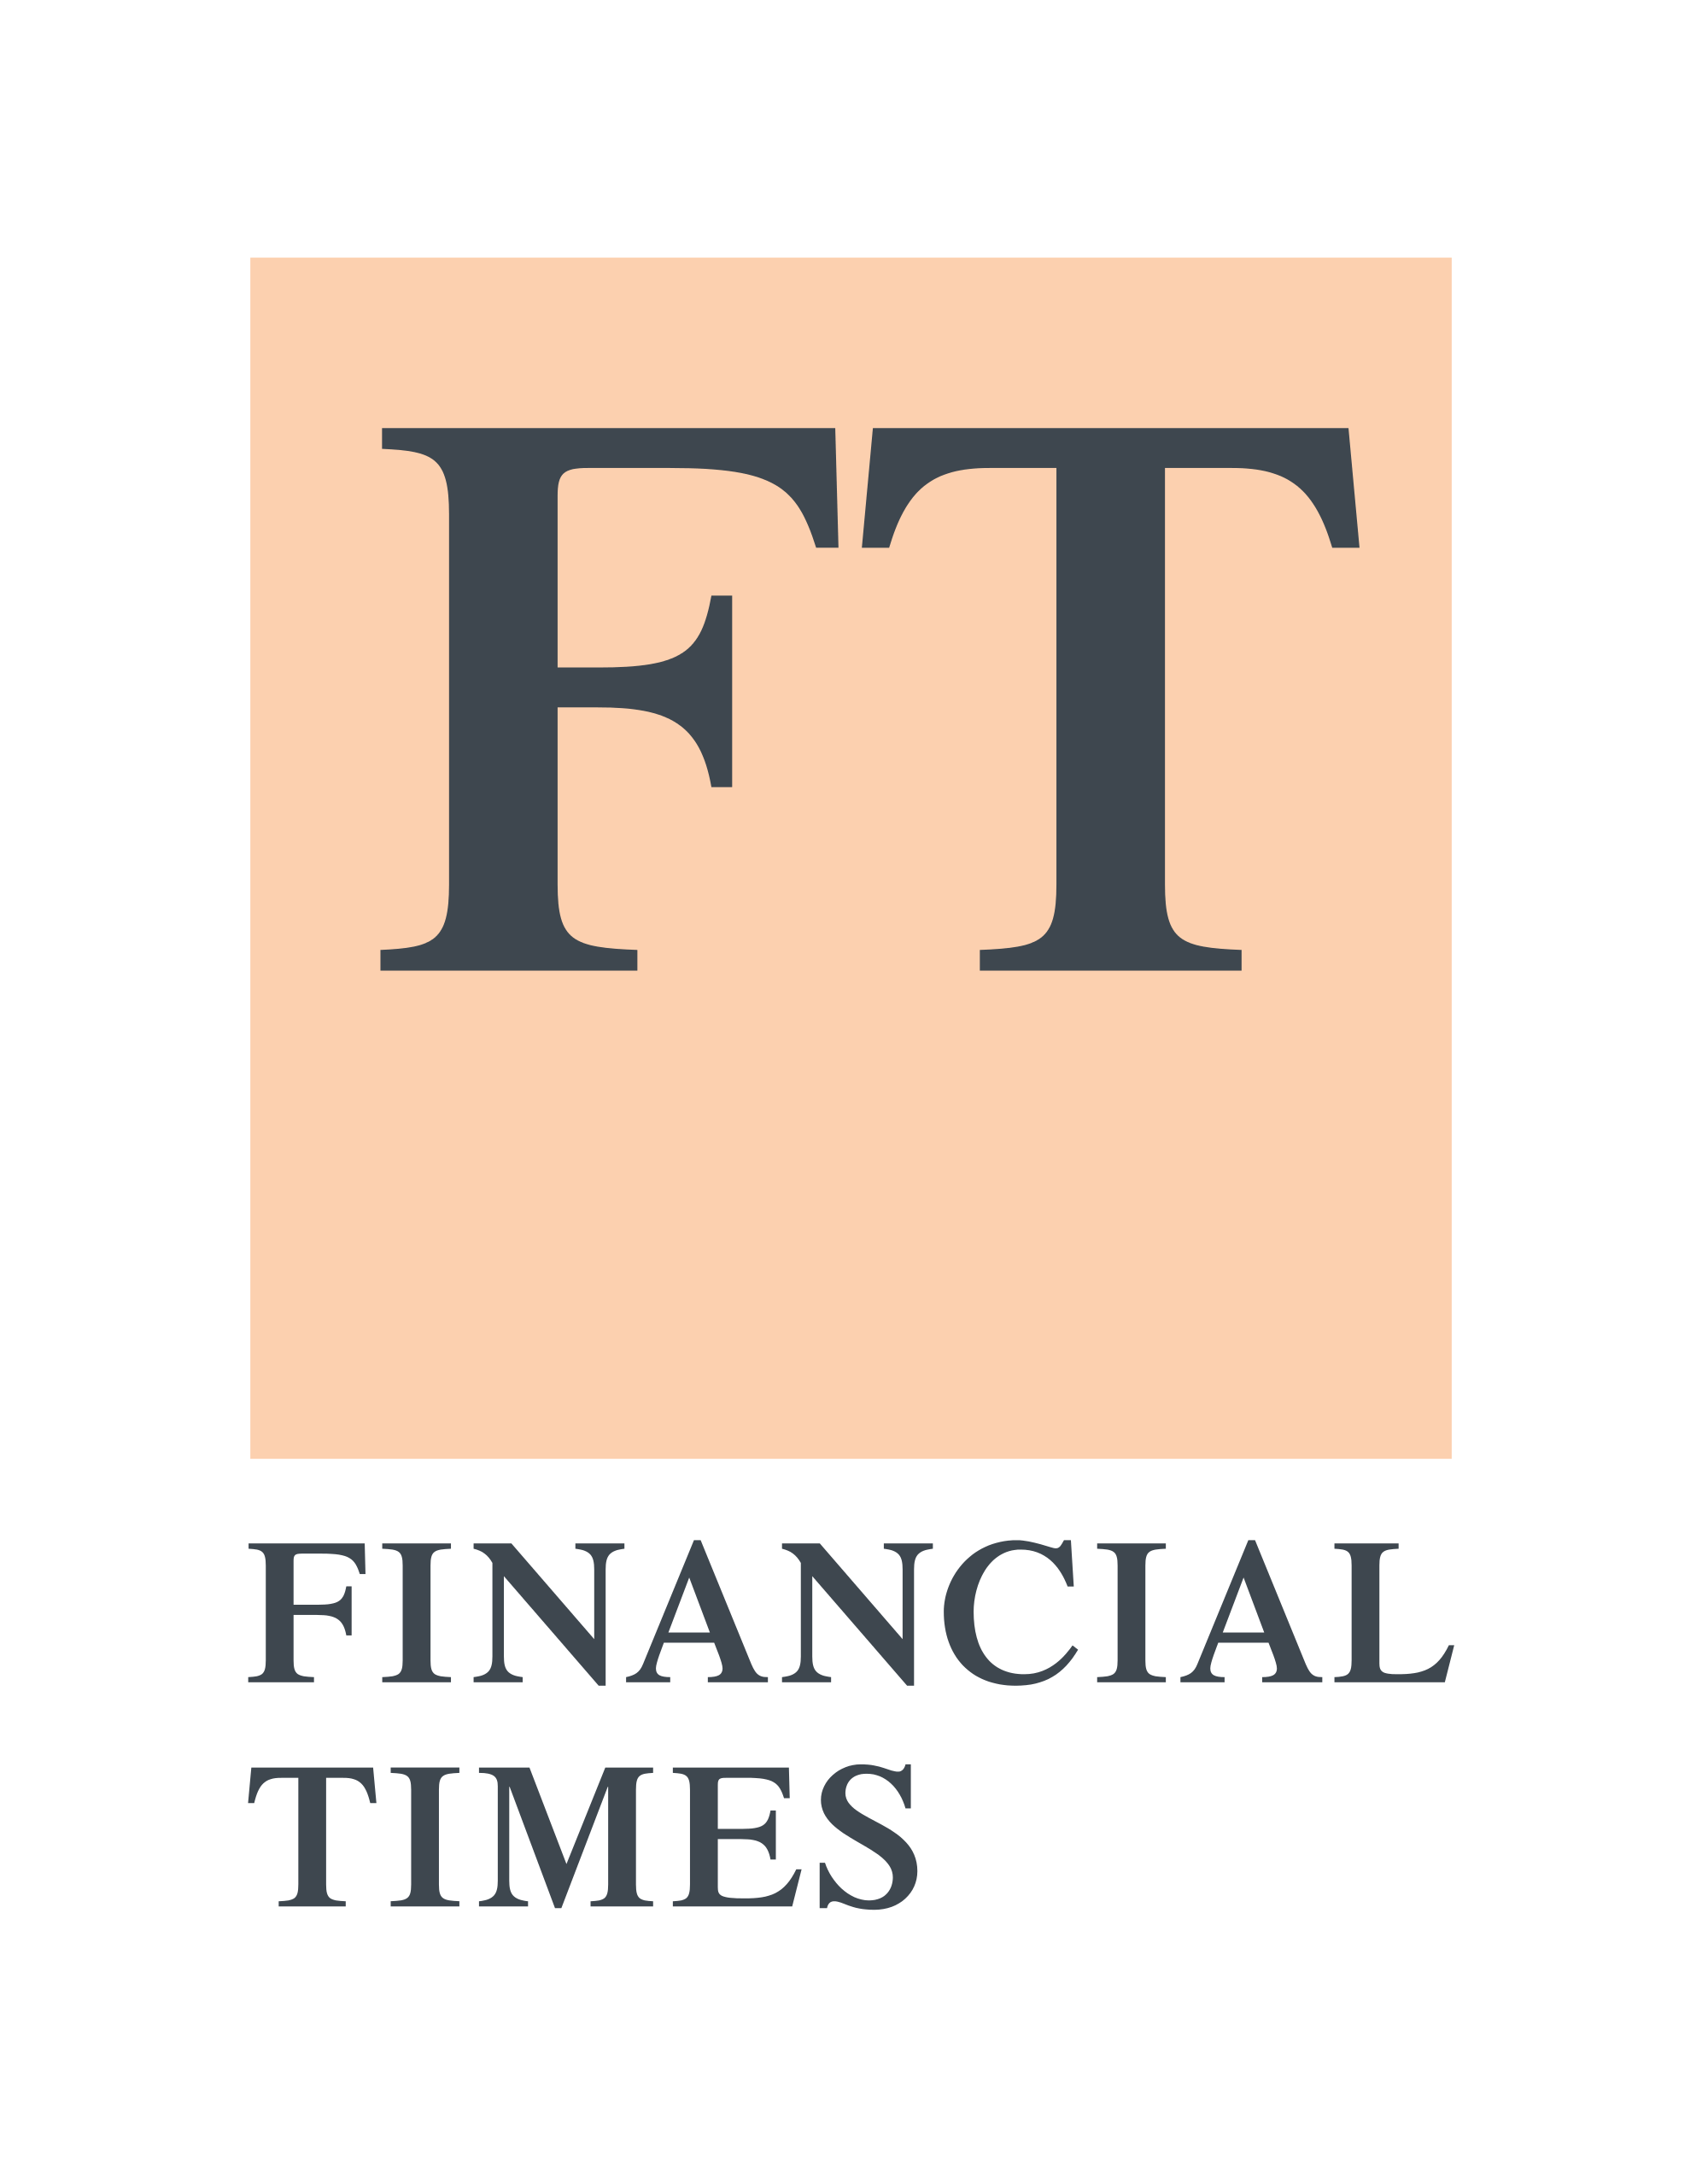 FT Logo - File:Financial Times corporate logo.svg - Wikimedia Commons